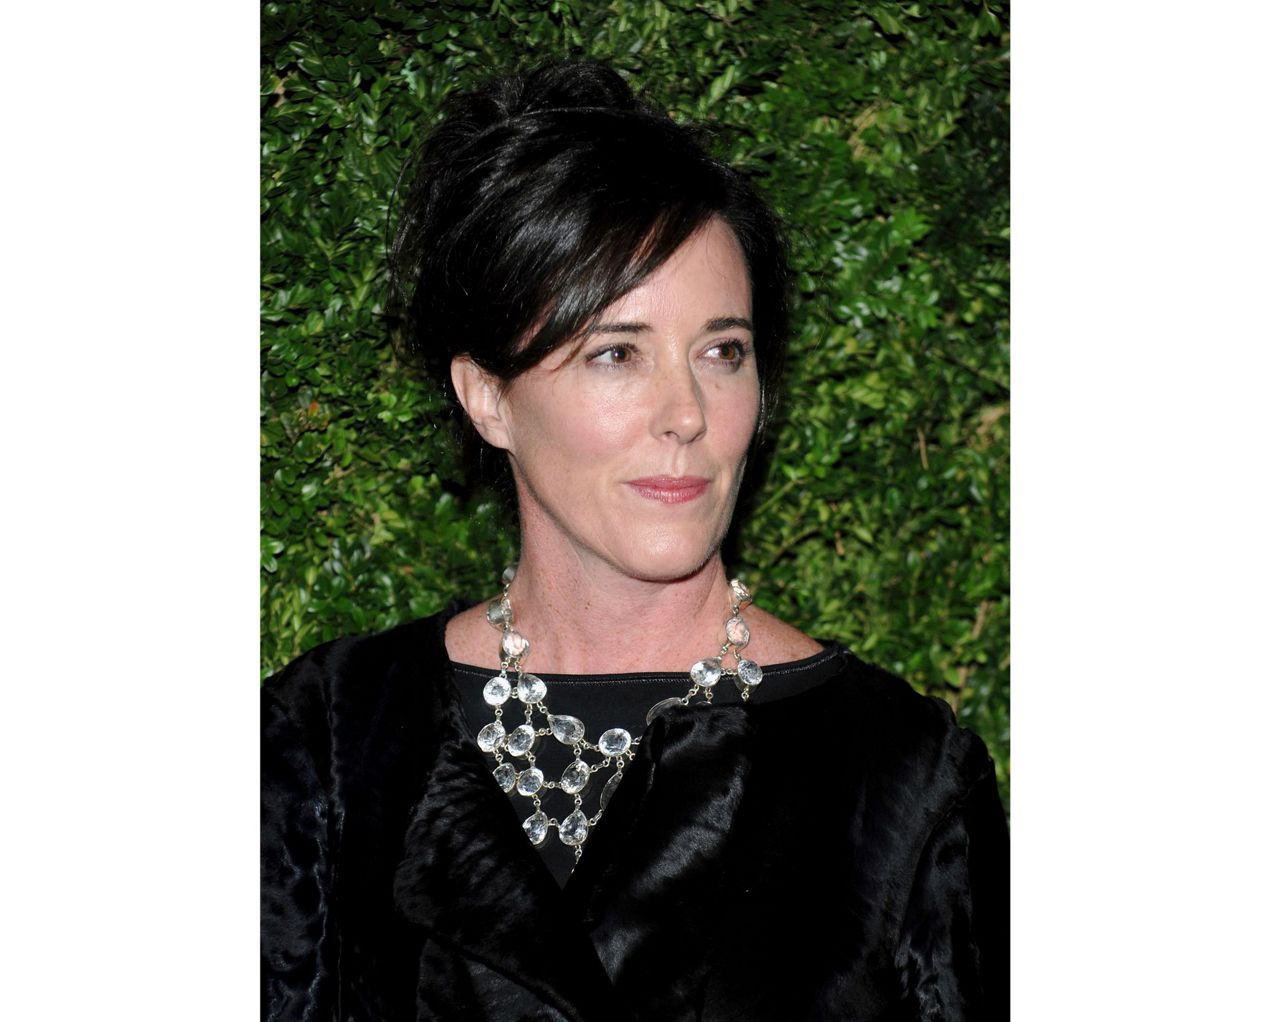 Kate Spade Foundation to donate $1M for suicide prevention